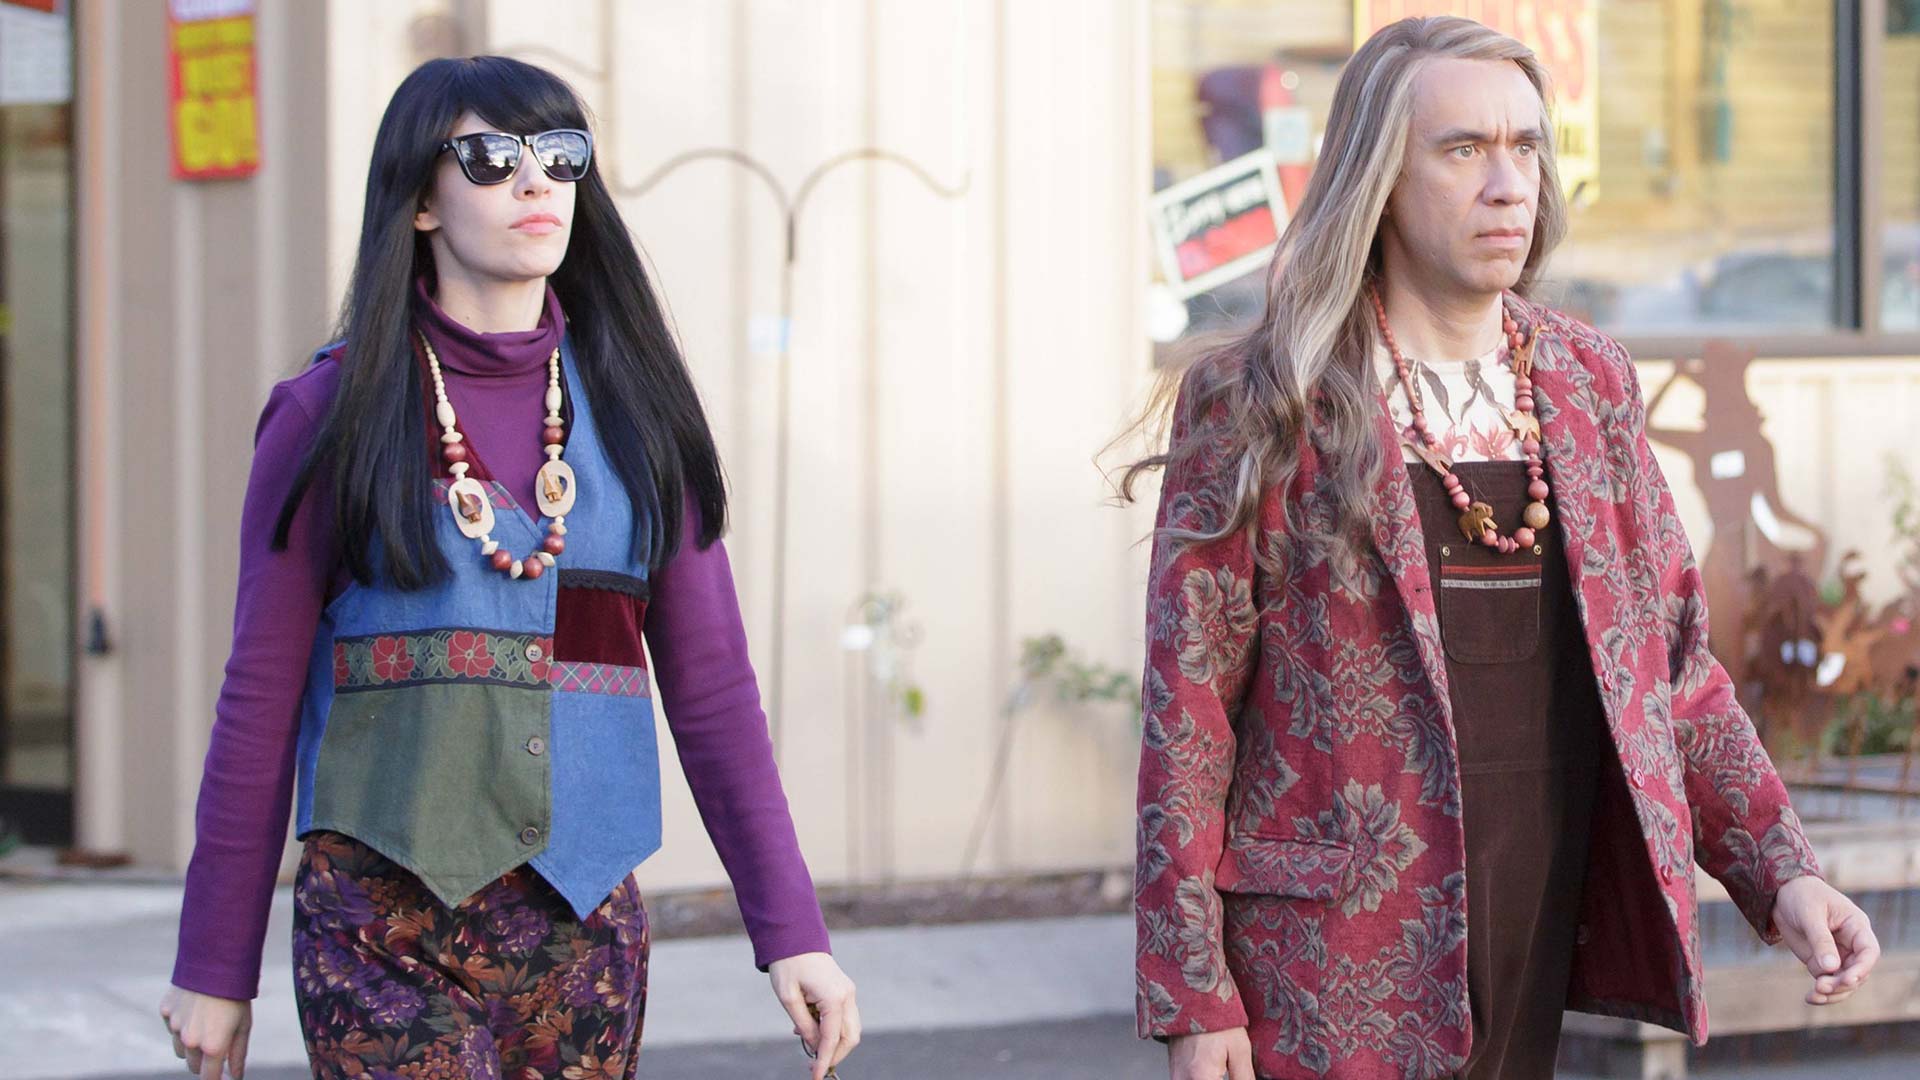 10 Real Places Portlandia Fans Need To Check Out - IFC.